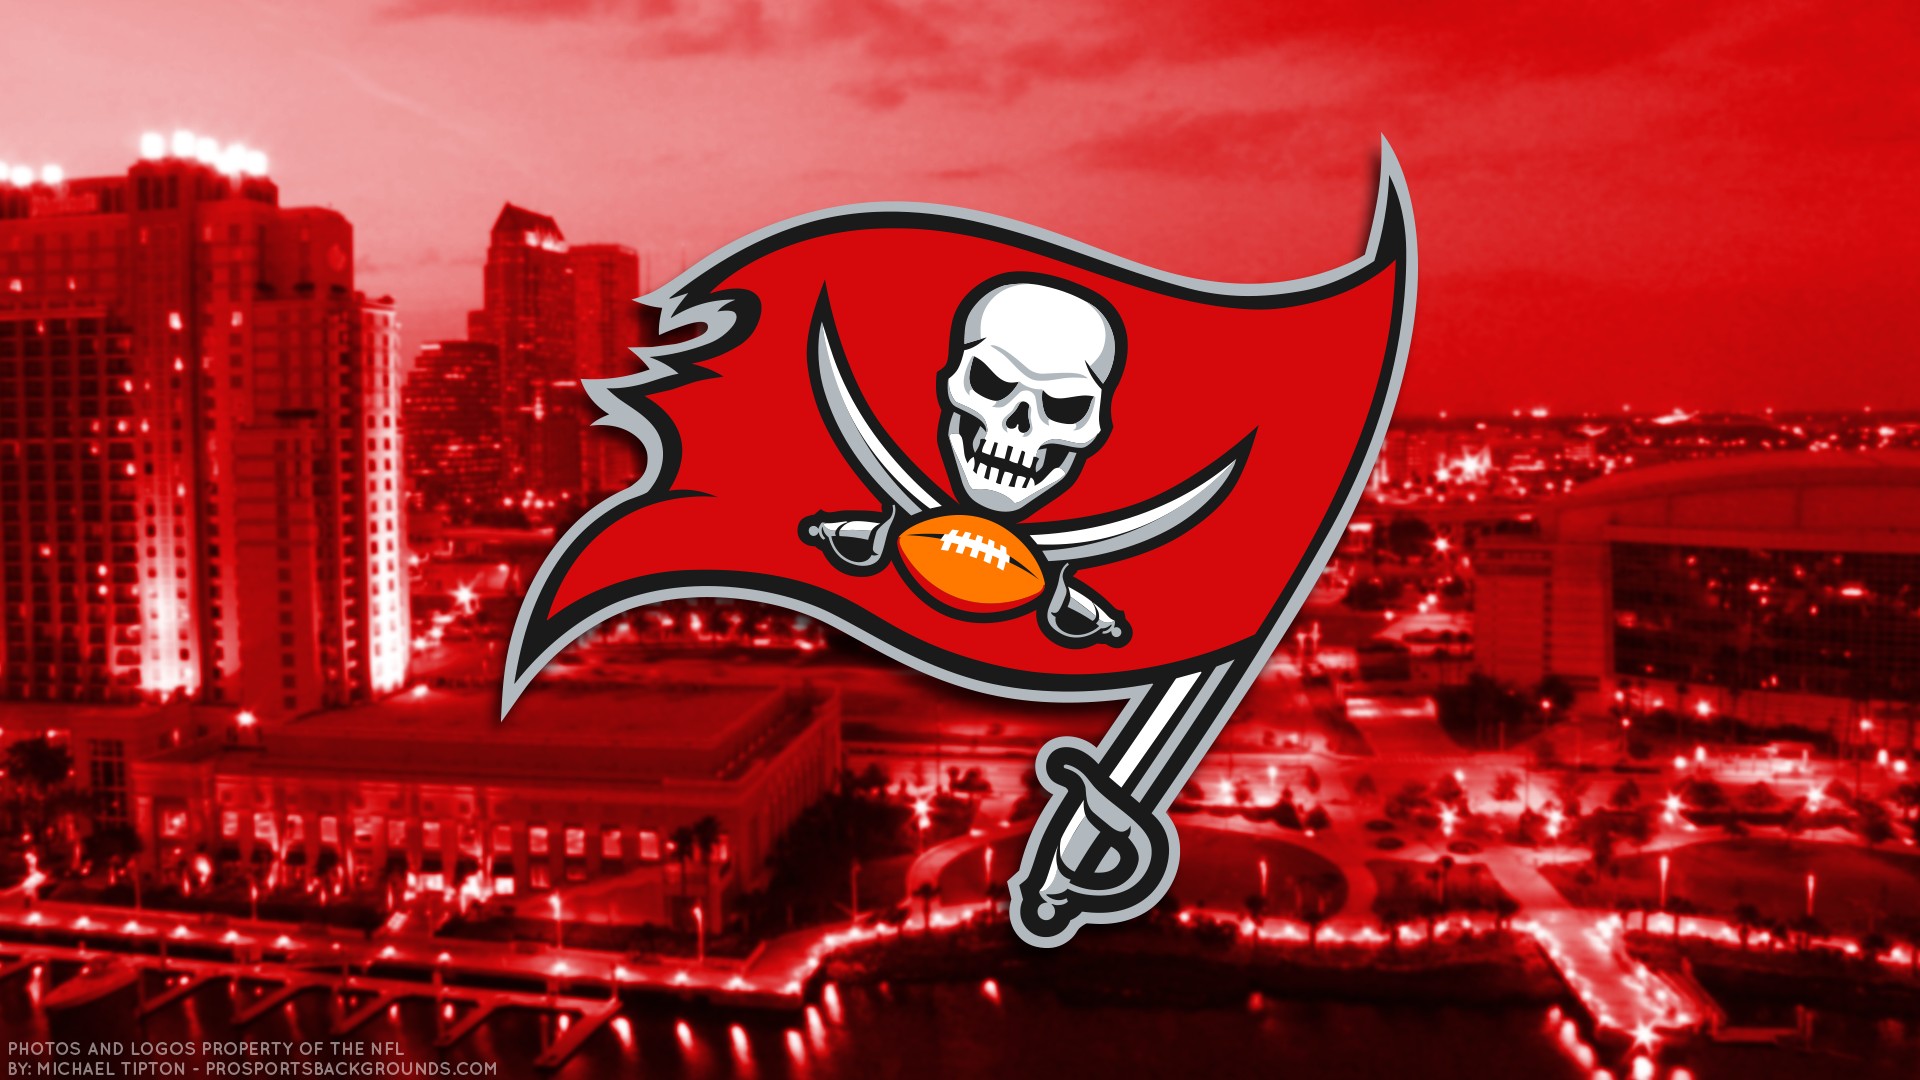 Windows Wallpaper Tampa Bay Buccaneers with high-resolution 1920x1080 pixel. You can use this wallpaper for your Mac or Windows Desktop Background, iPhone, Android or Tablet and another Smartphone device